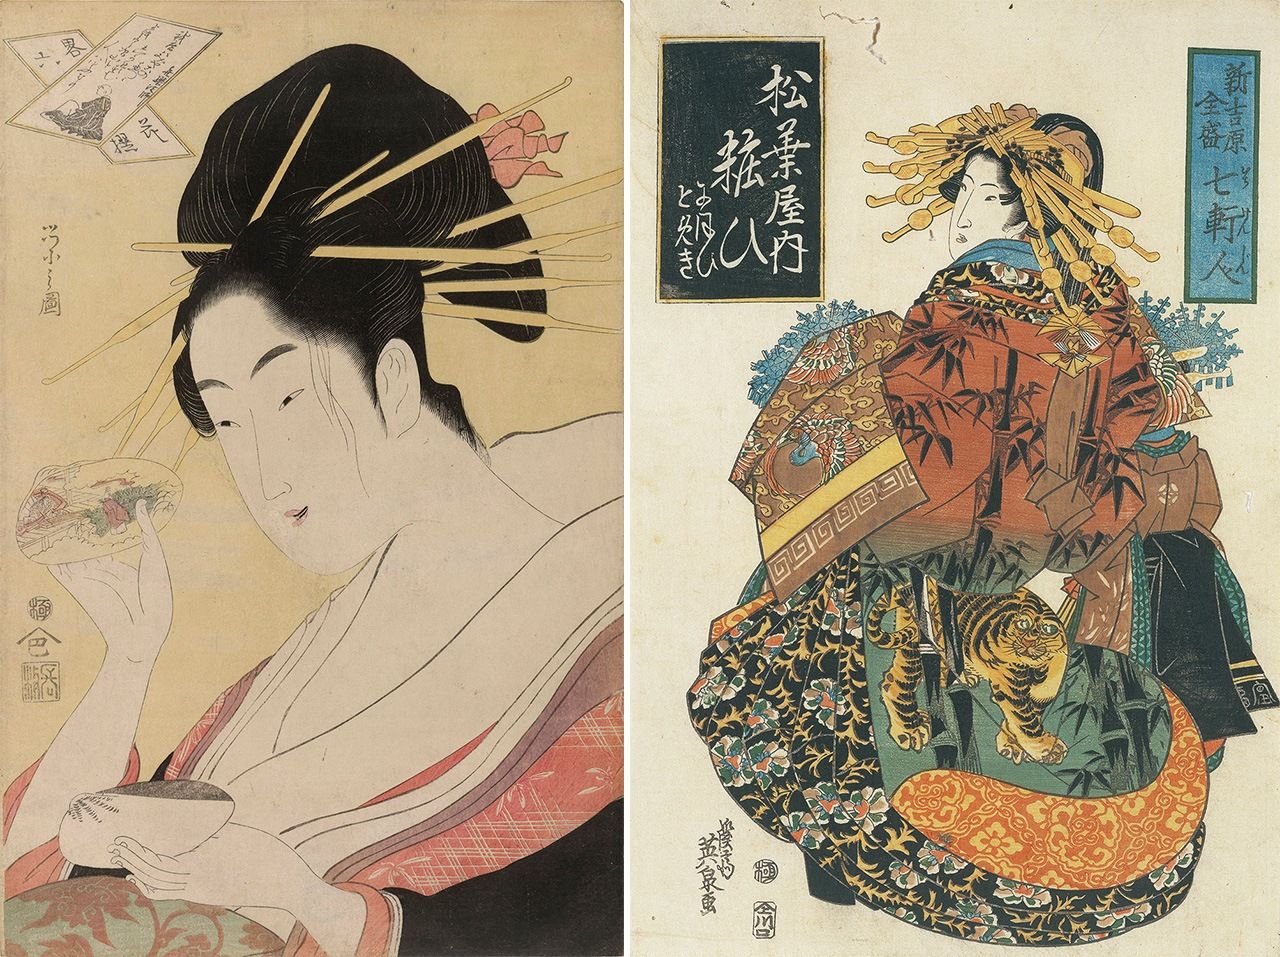 At left, Chōbunsai Eishi, Yatsushi rokkasen (A Casual Selection of Six Flowers) ca. 1796–98 (© The Trustees of the British Museum); at right, one of a series of pictures depicting the seven great oiran courtesans of the Yoshiwara pleasure quarters by Keisai Eisen, ca. 1818–30. (Courtesy Hagi Uragami Museum, Yamaguchi Prefecture)